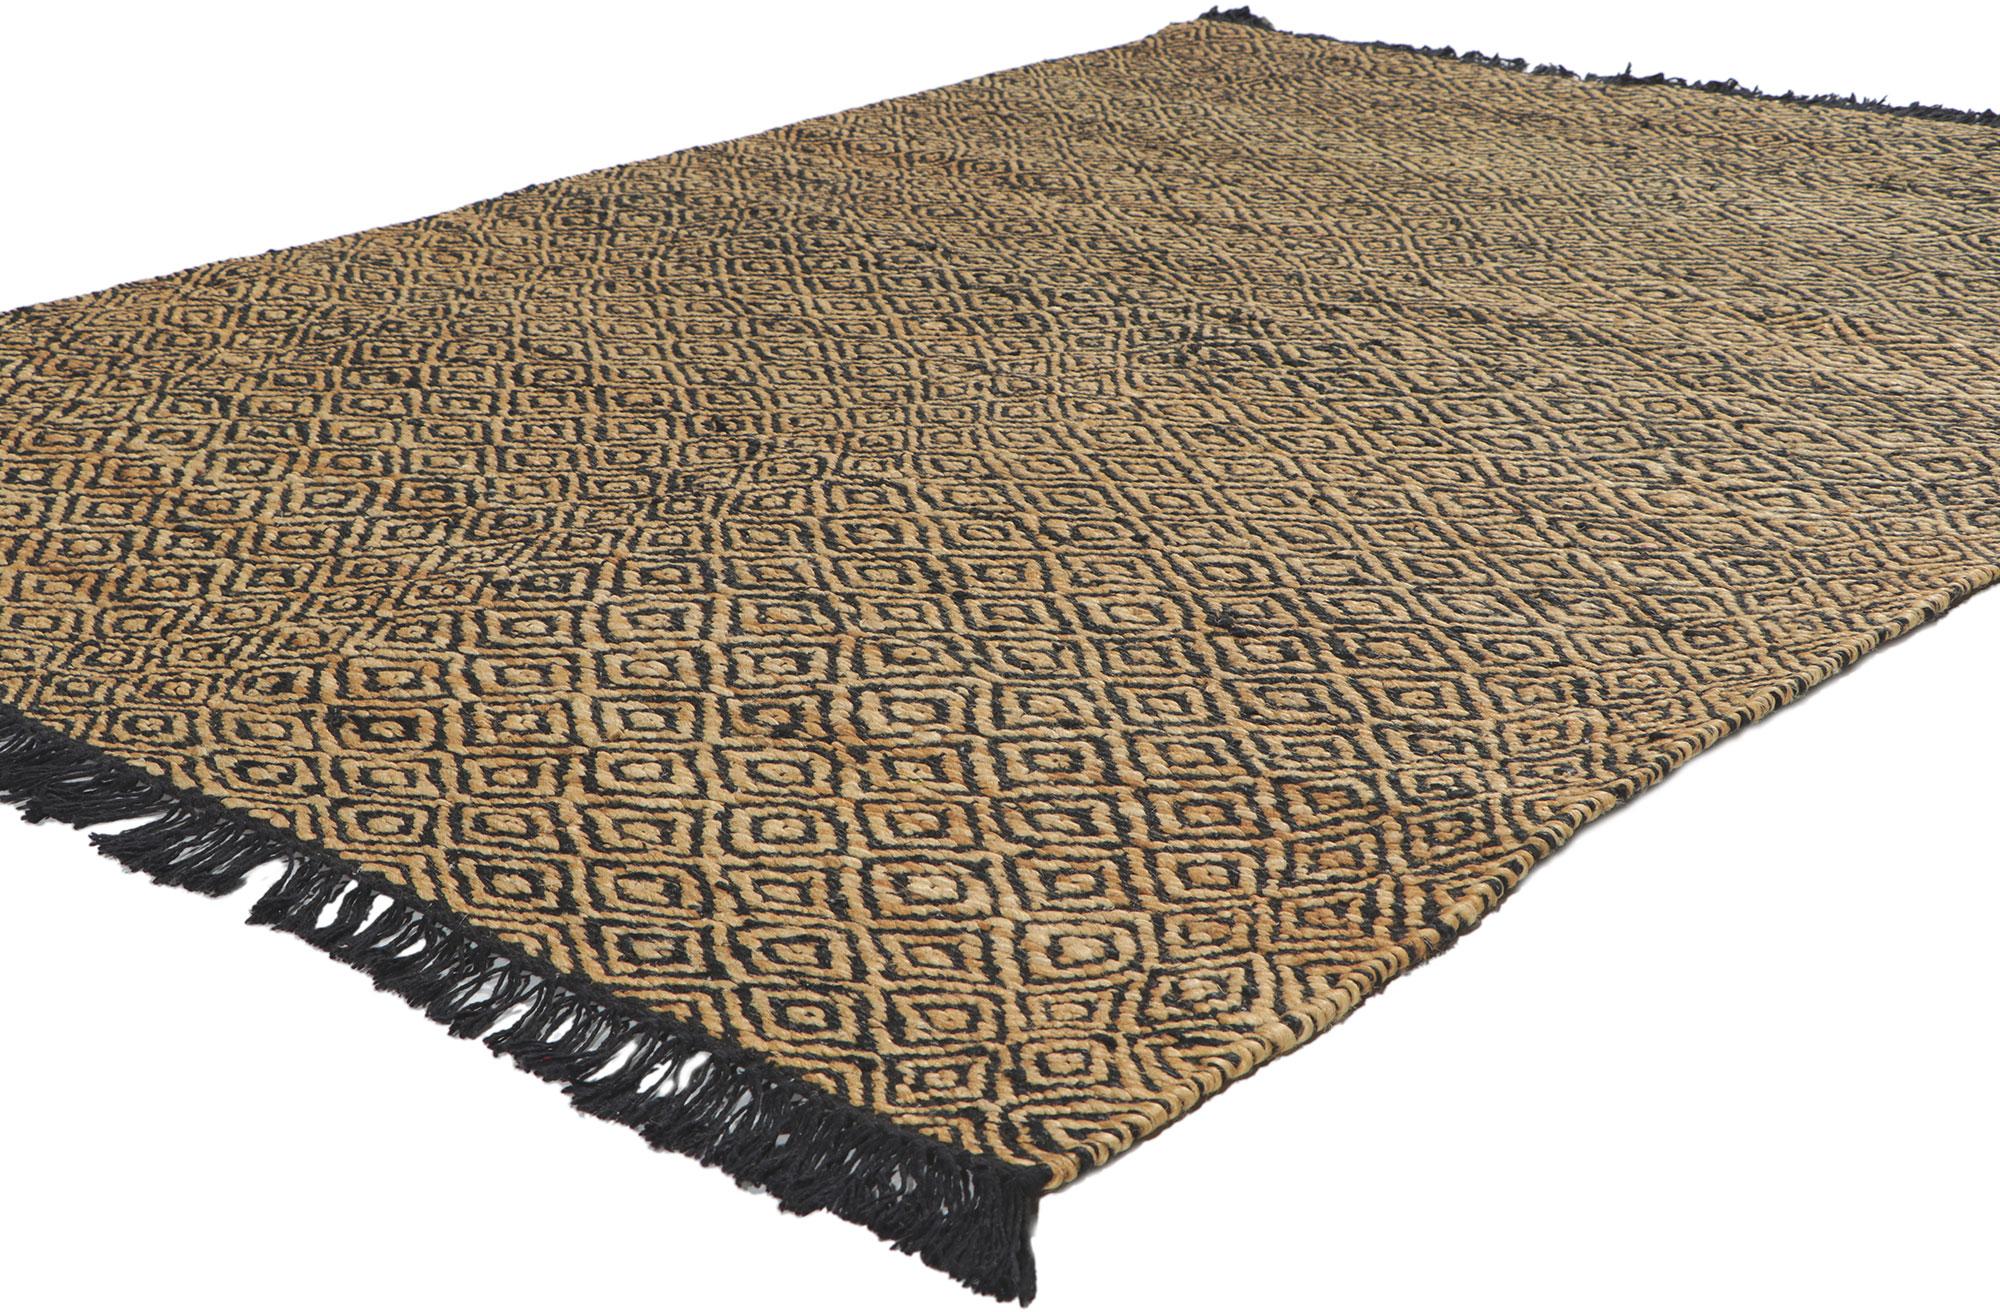 ?30901 New Handwoven Textured Jute Rug, 04'09 x 06'04. ?Emanating Biophilic Design with incredible detail and texture, this handwoven jute rug is a captivating vision of woven beauty. The allover diamond pattern and earthy colorway woven into this